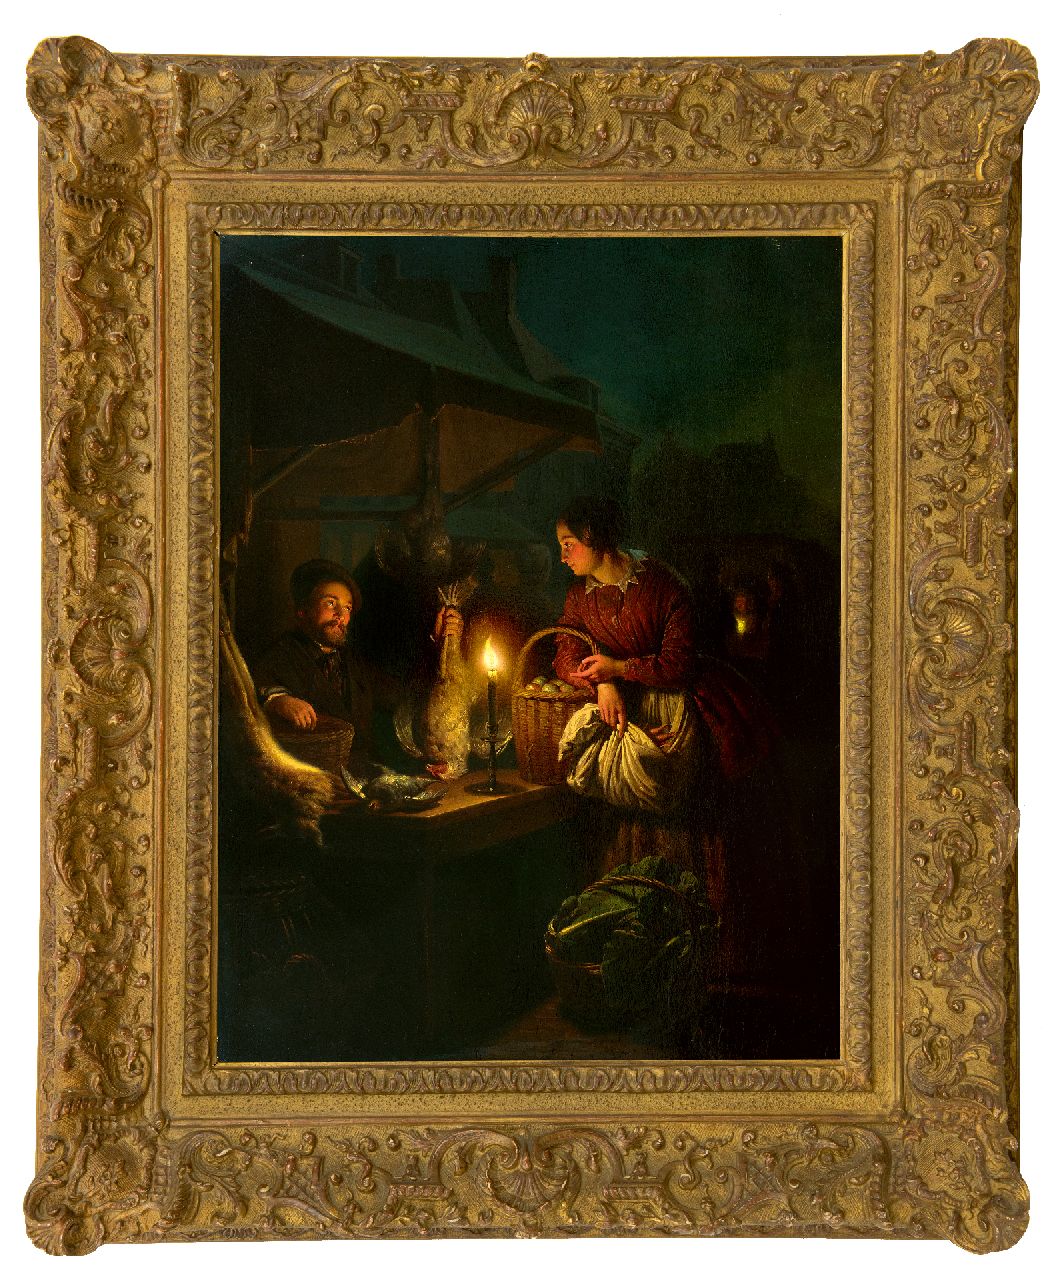 Schendel P. van | Petrus van Schendel, The game and poultry seller, by candle light, oil on panel 57.0 x 42.8 cm, signed l.r. and dated 1856